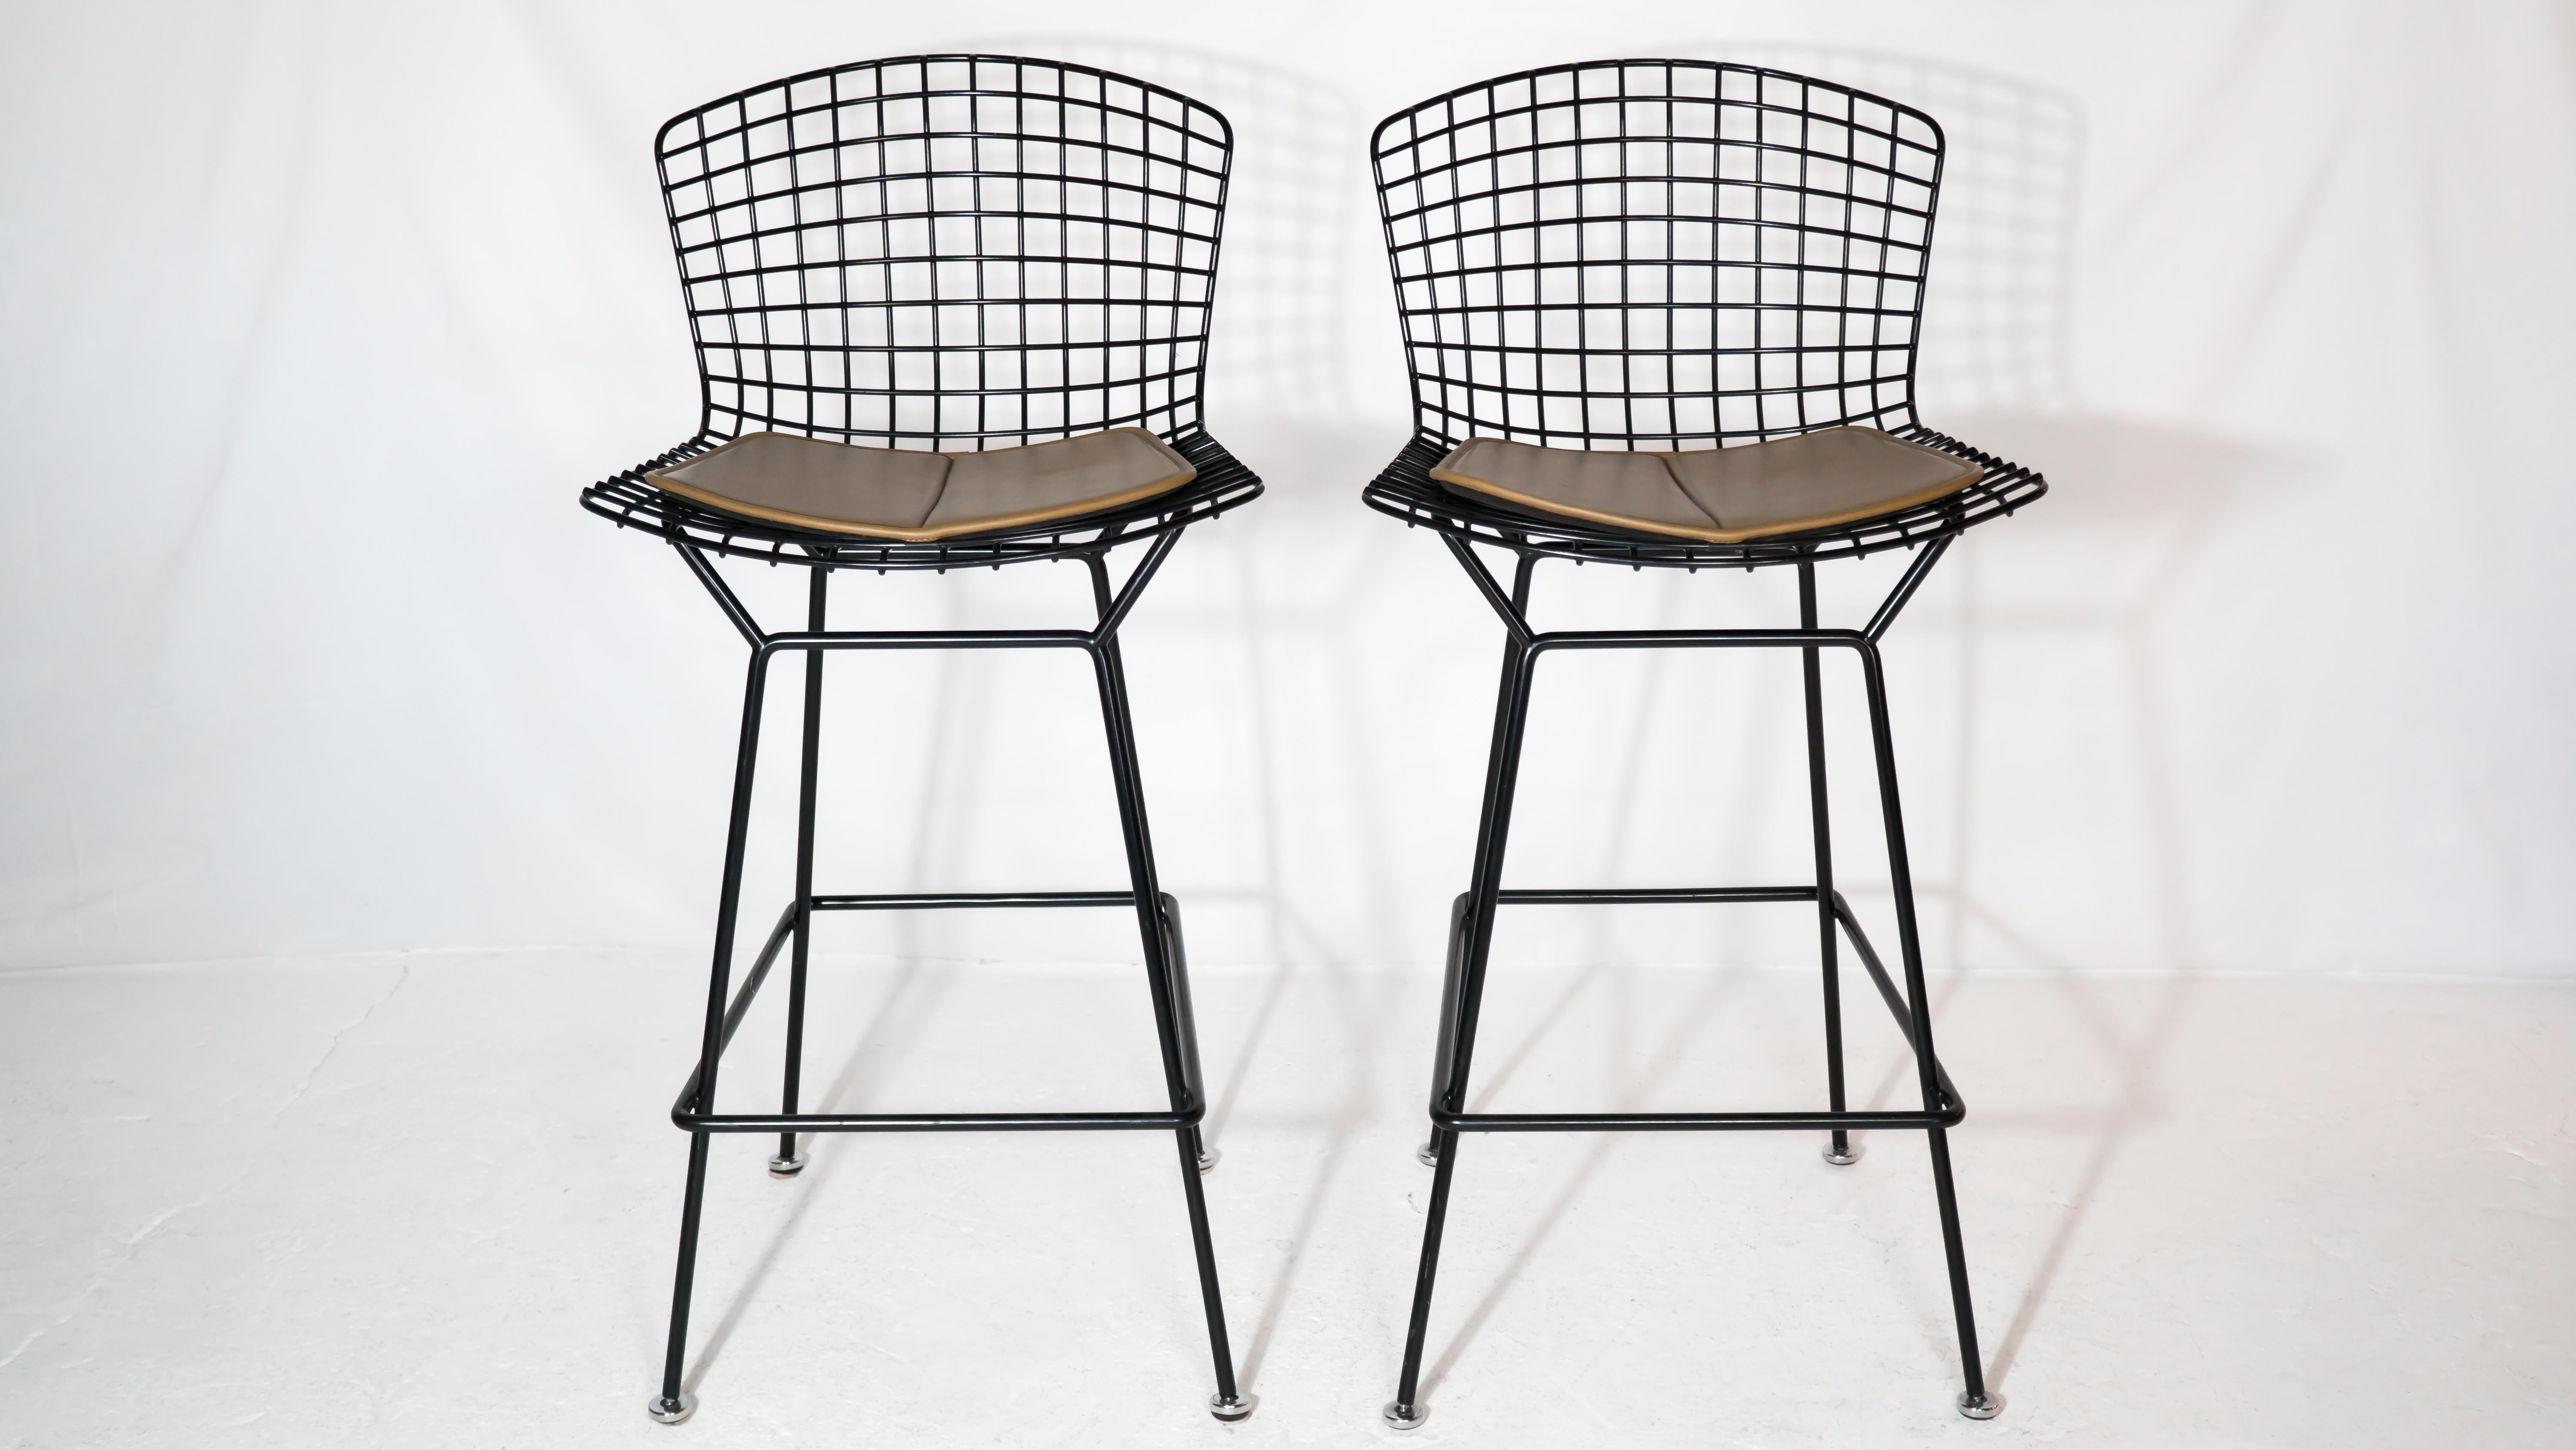 Pair of authentic Bertoia bar stools by Harry Bertoia for Knoll International, circa 1988. Black powder coated frame with original tan colored seat pad that snaps securely to the frame. In absolute pristine condition with no almost no signs of wear.